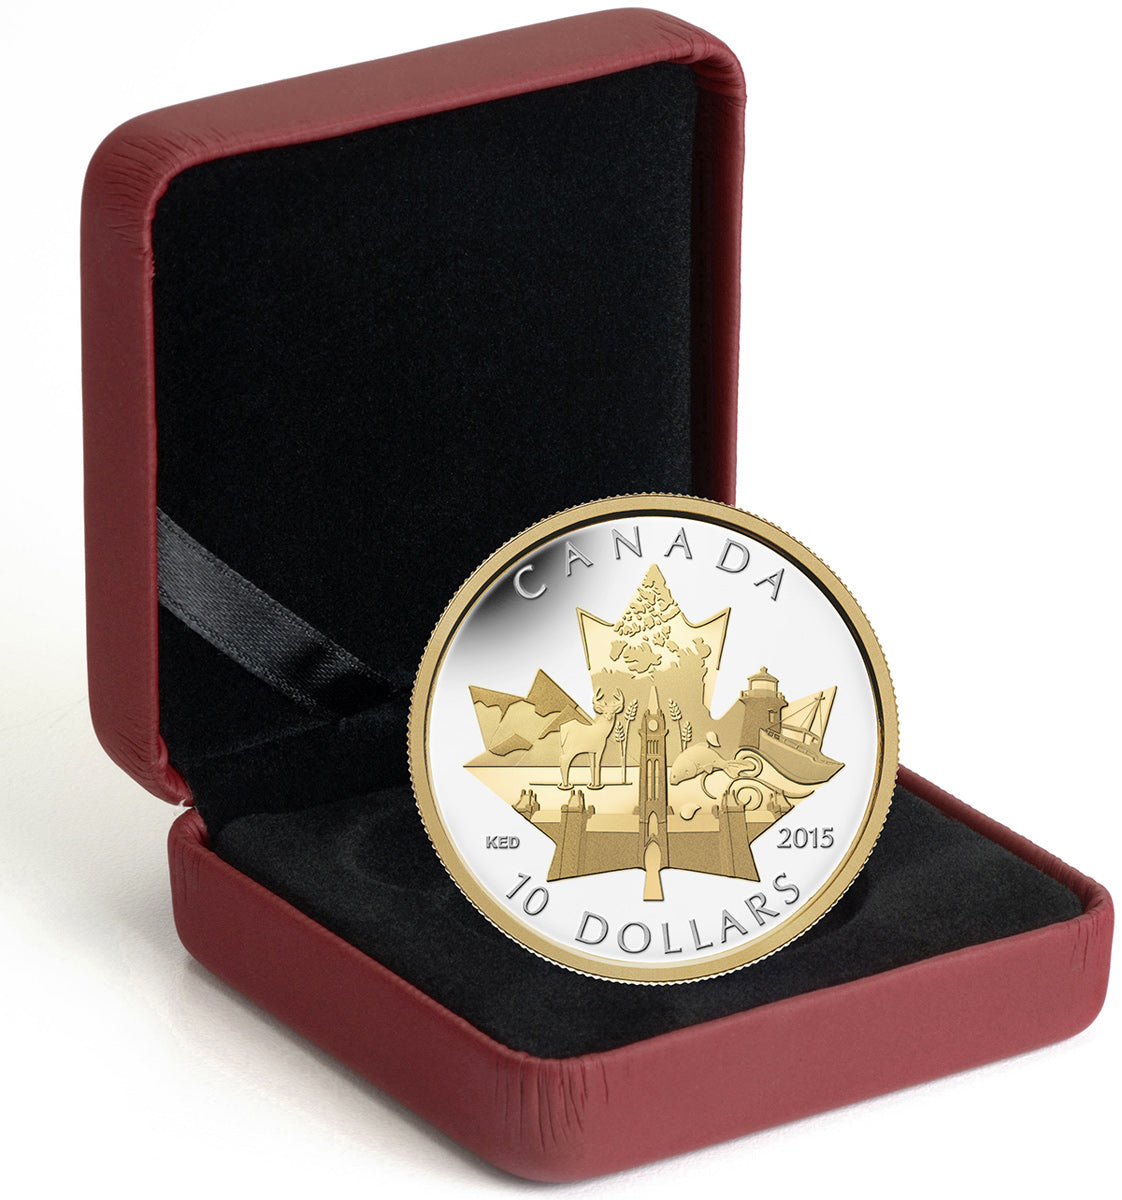 1/2 oz. Fine Silver Gold-Plated Coin - Celebrating Canada - Mintage: 8,000 (2015)